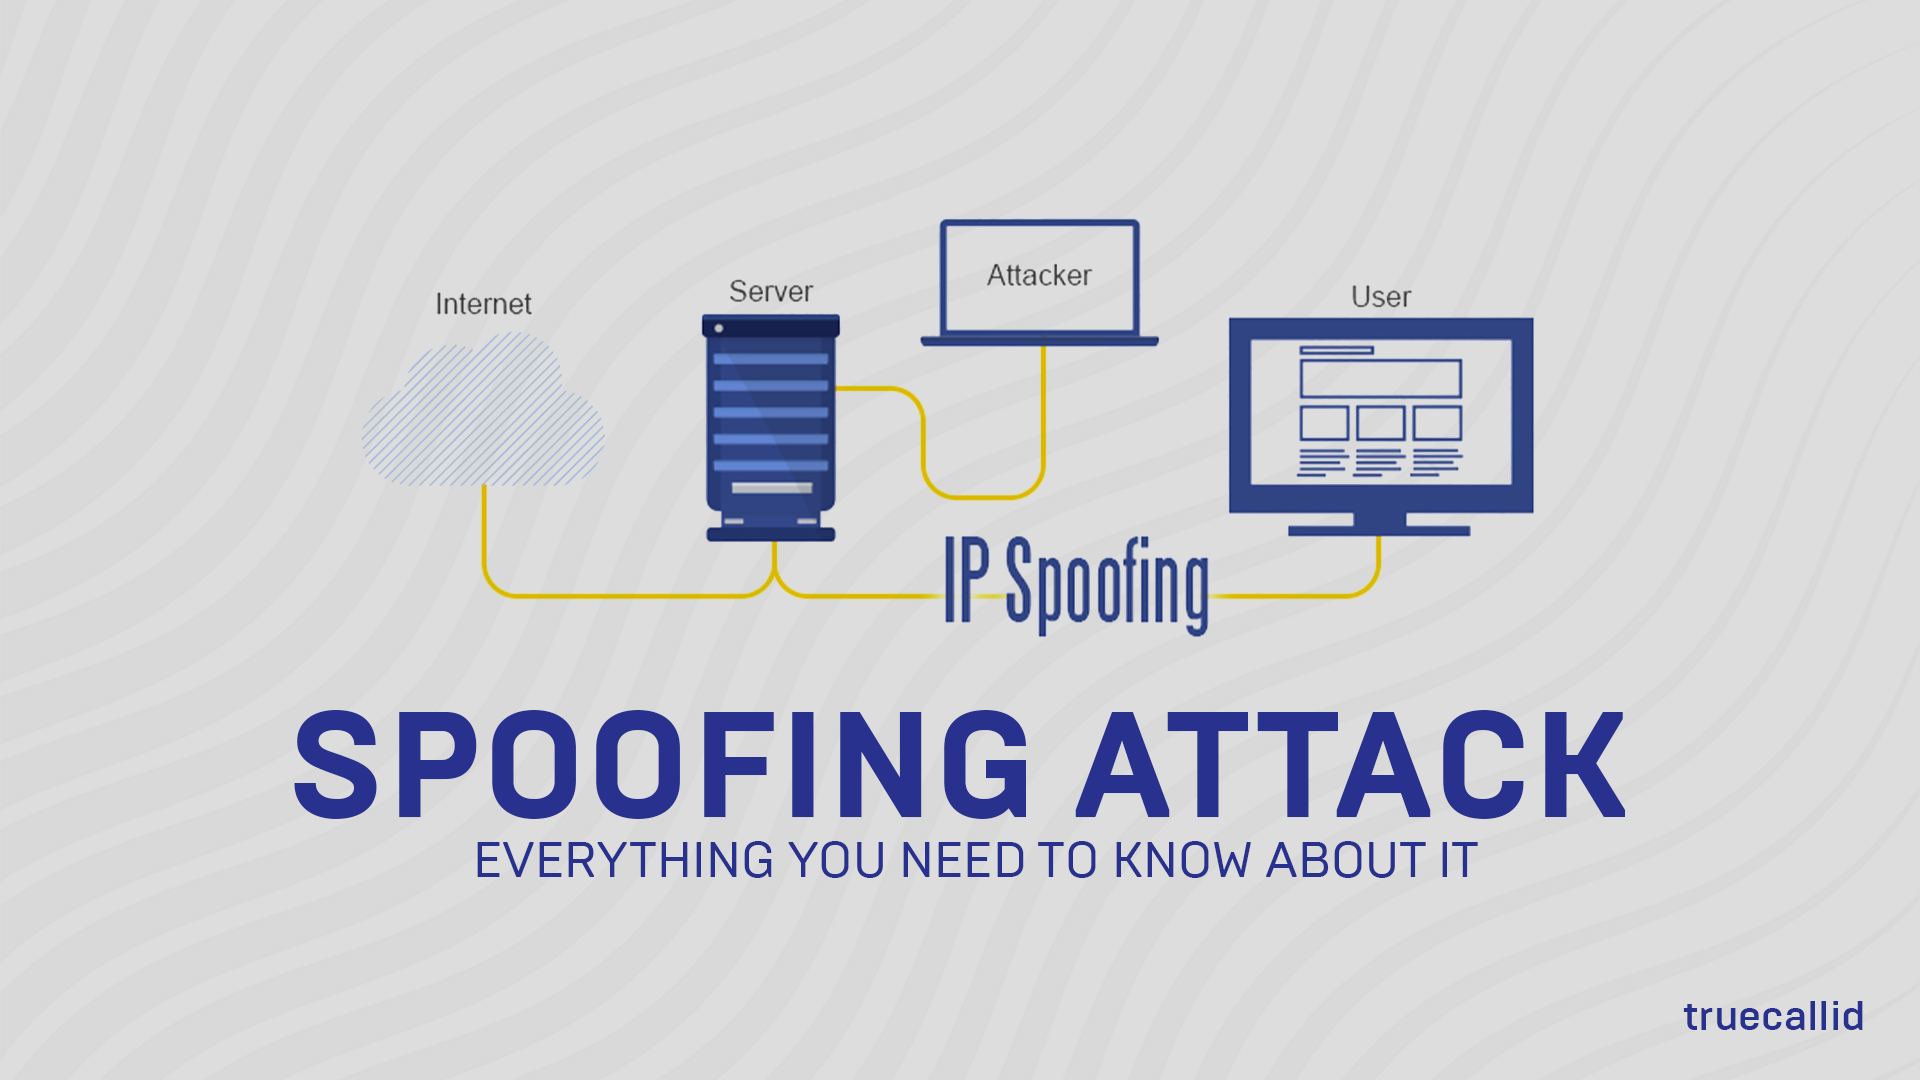 SPOOFING ATTACK – EVERYTHING YOU NEED TO KNOW ABOUT IT